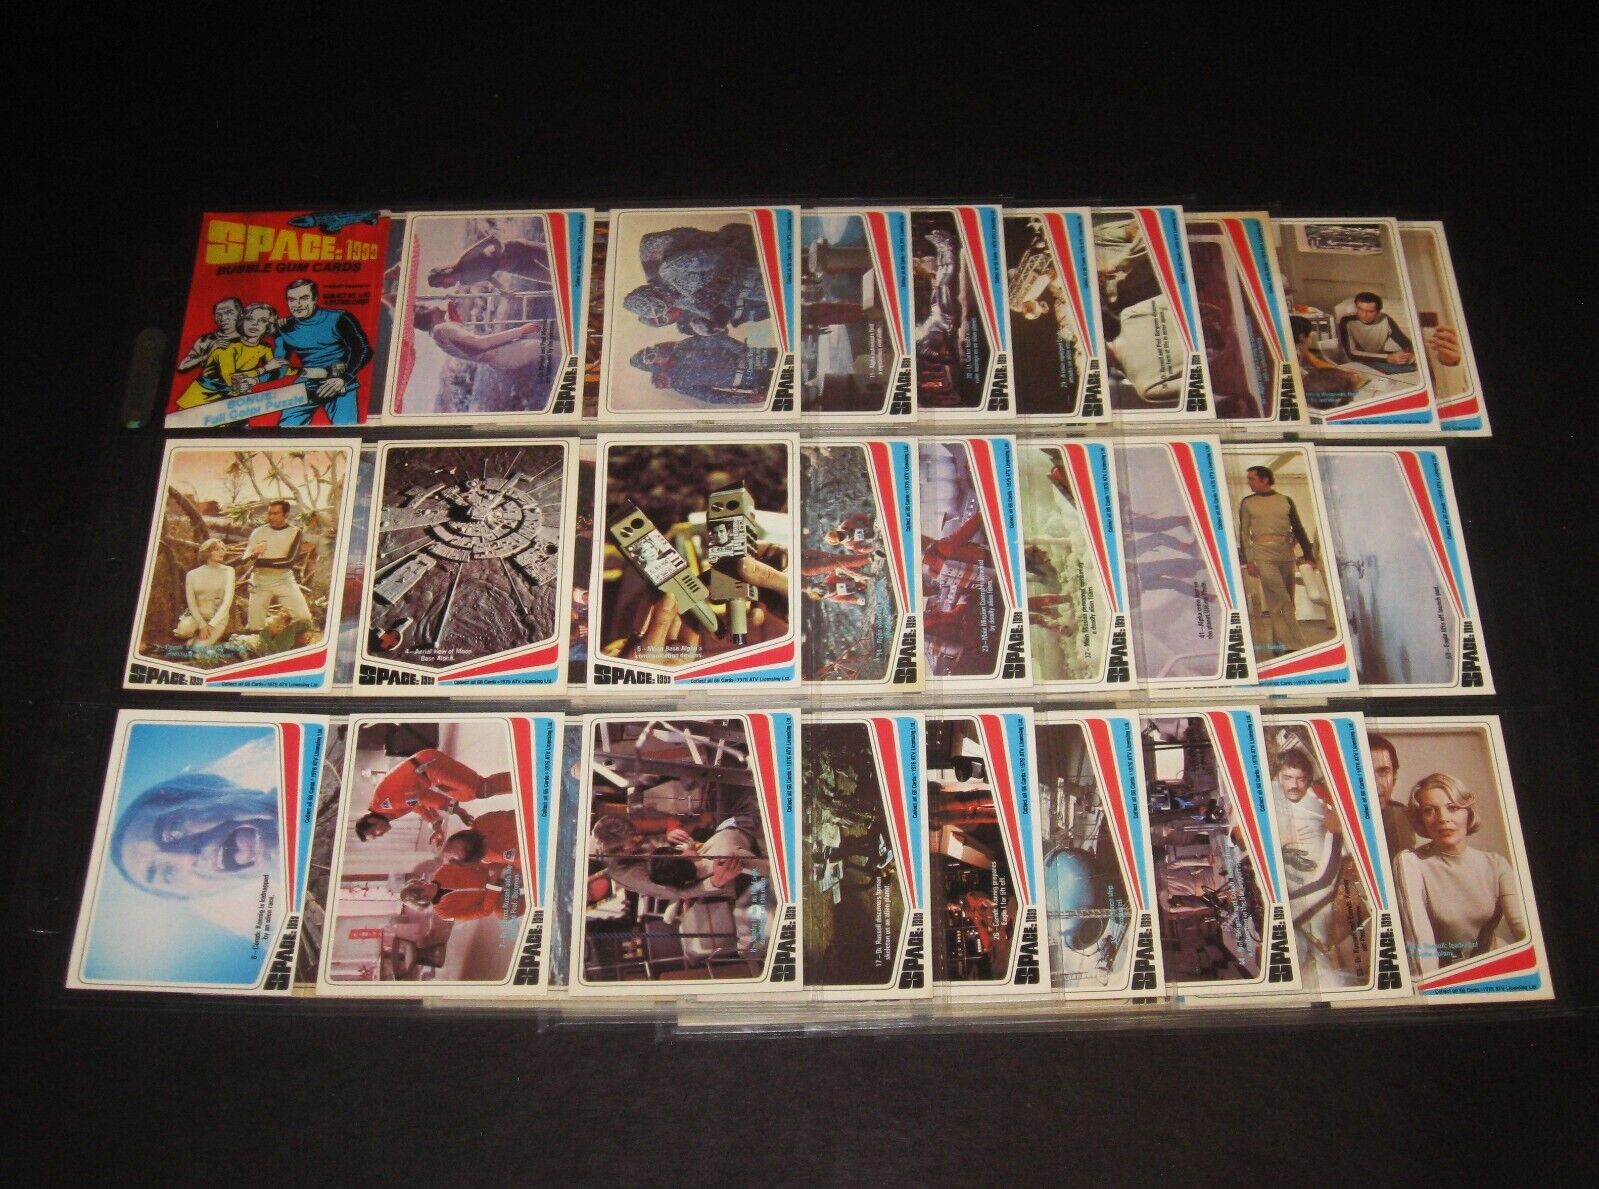 SPACE 1999 © 1976 Donruss Complete 66 Trading Card Set + Wrapper